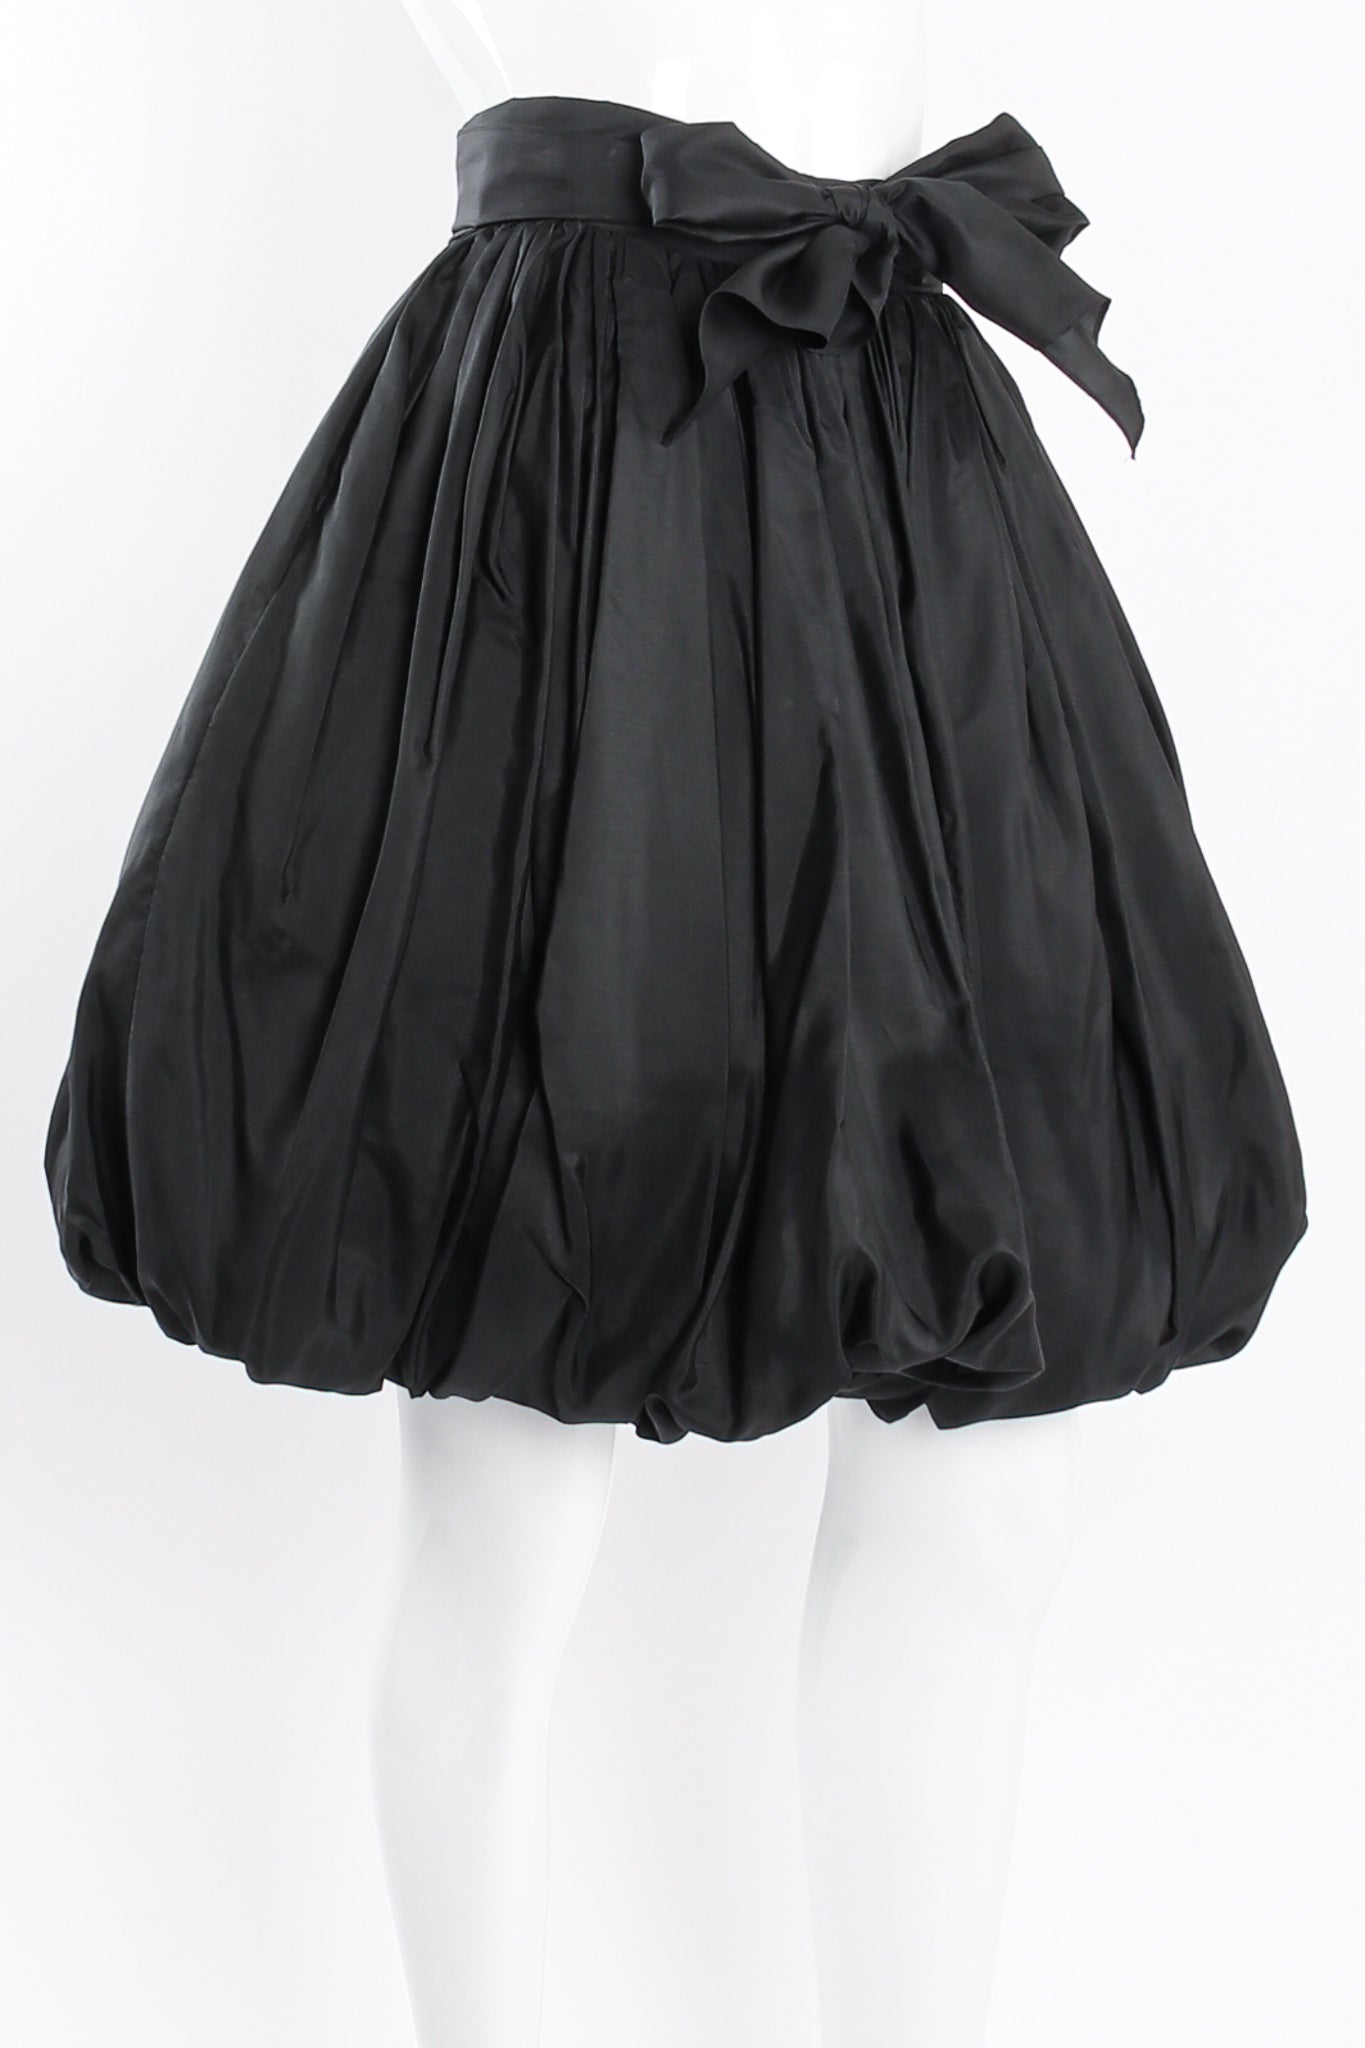 Vintage Adrienne Vittadini Gathered Silk Bubble Skirt on Mannequin crop at Recess Los Angeles